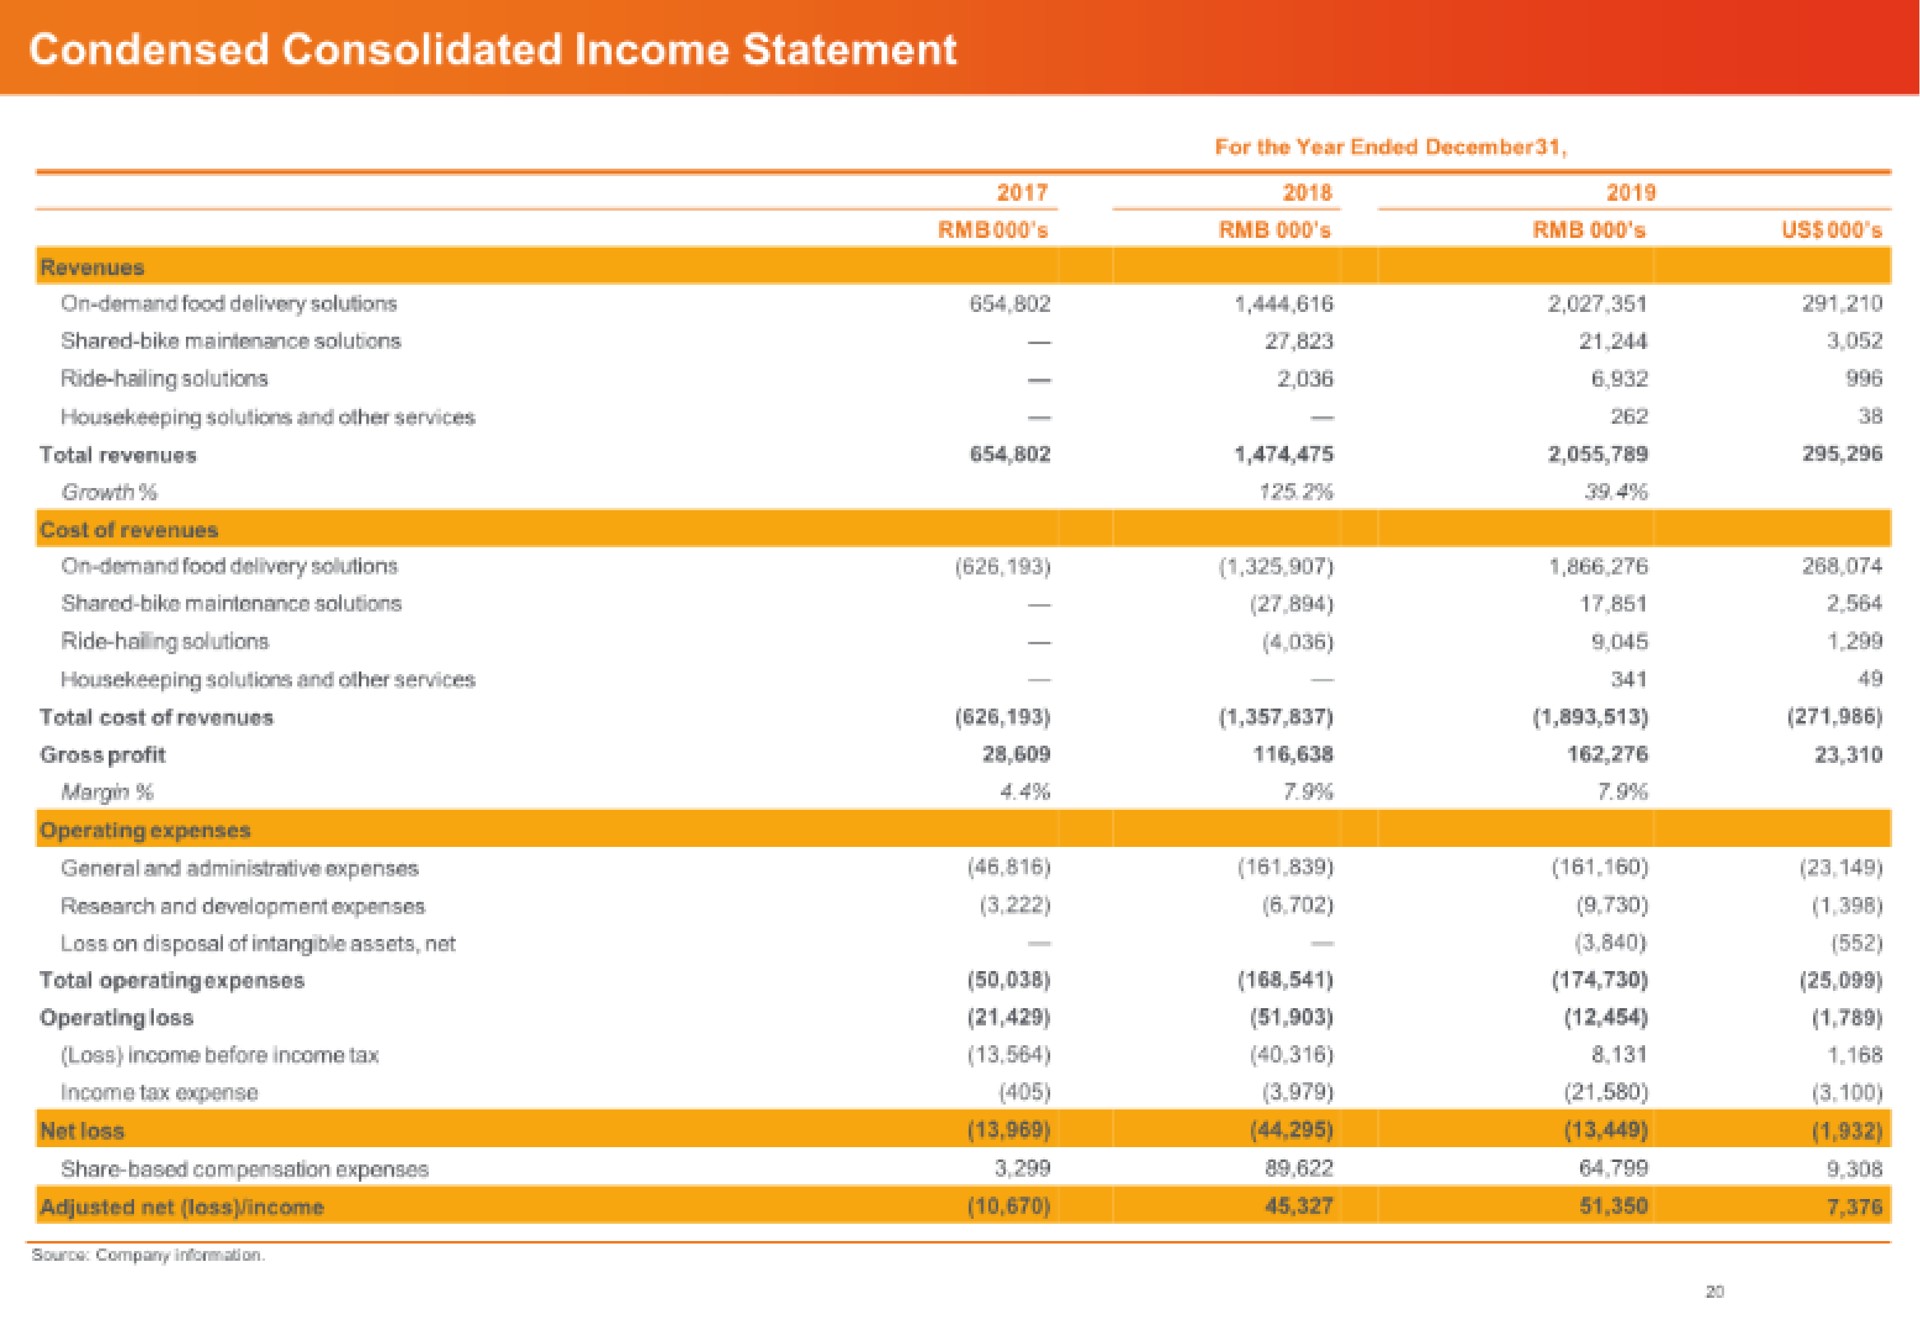 condensed consolidated income statement cost of reves | Quhuo